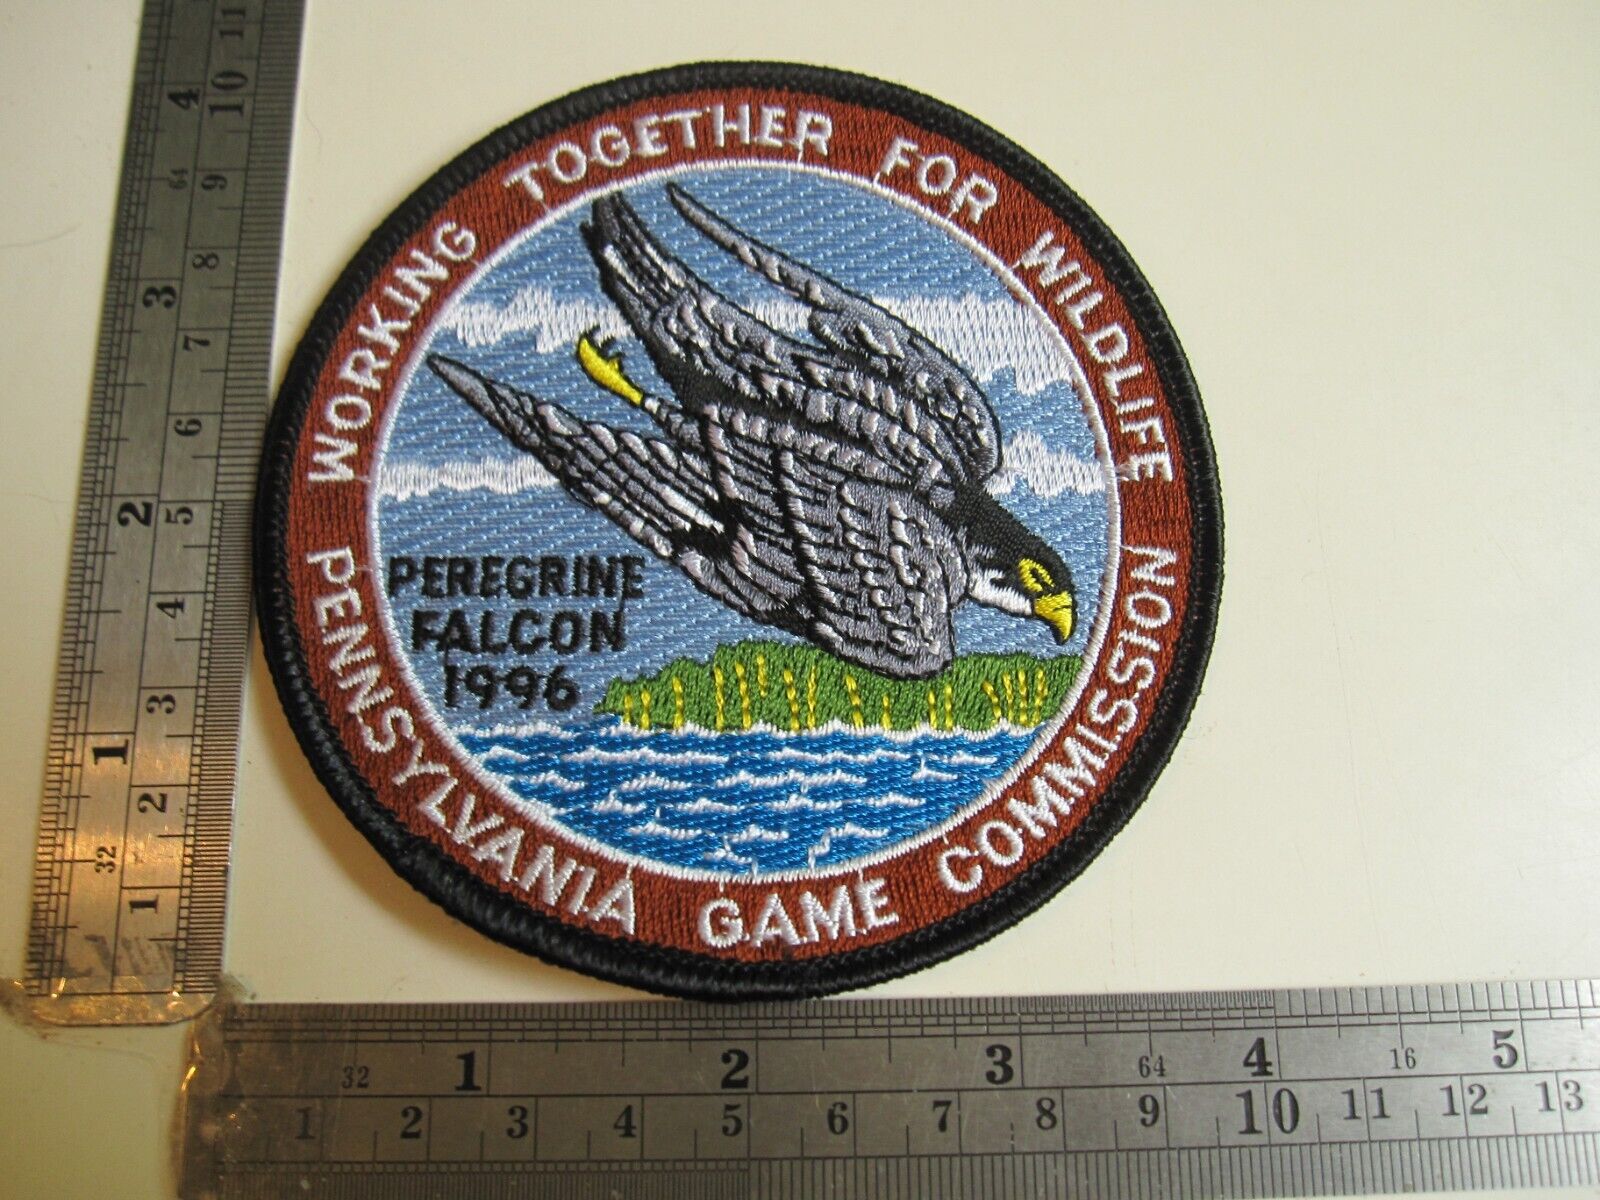 1996 Pennsylvania Game Commission PEREGRINE FALCON Hunting Related Patch BIS